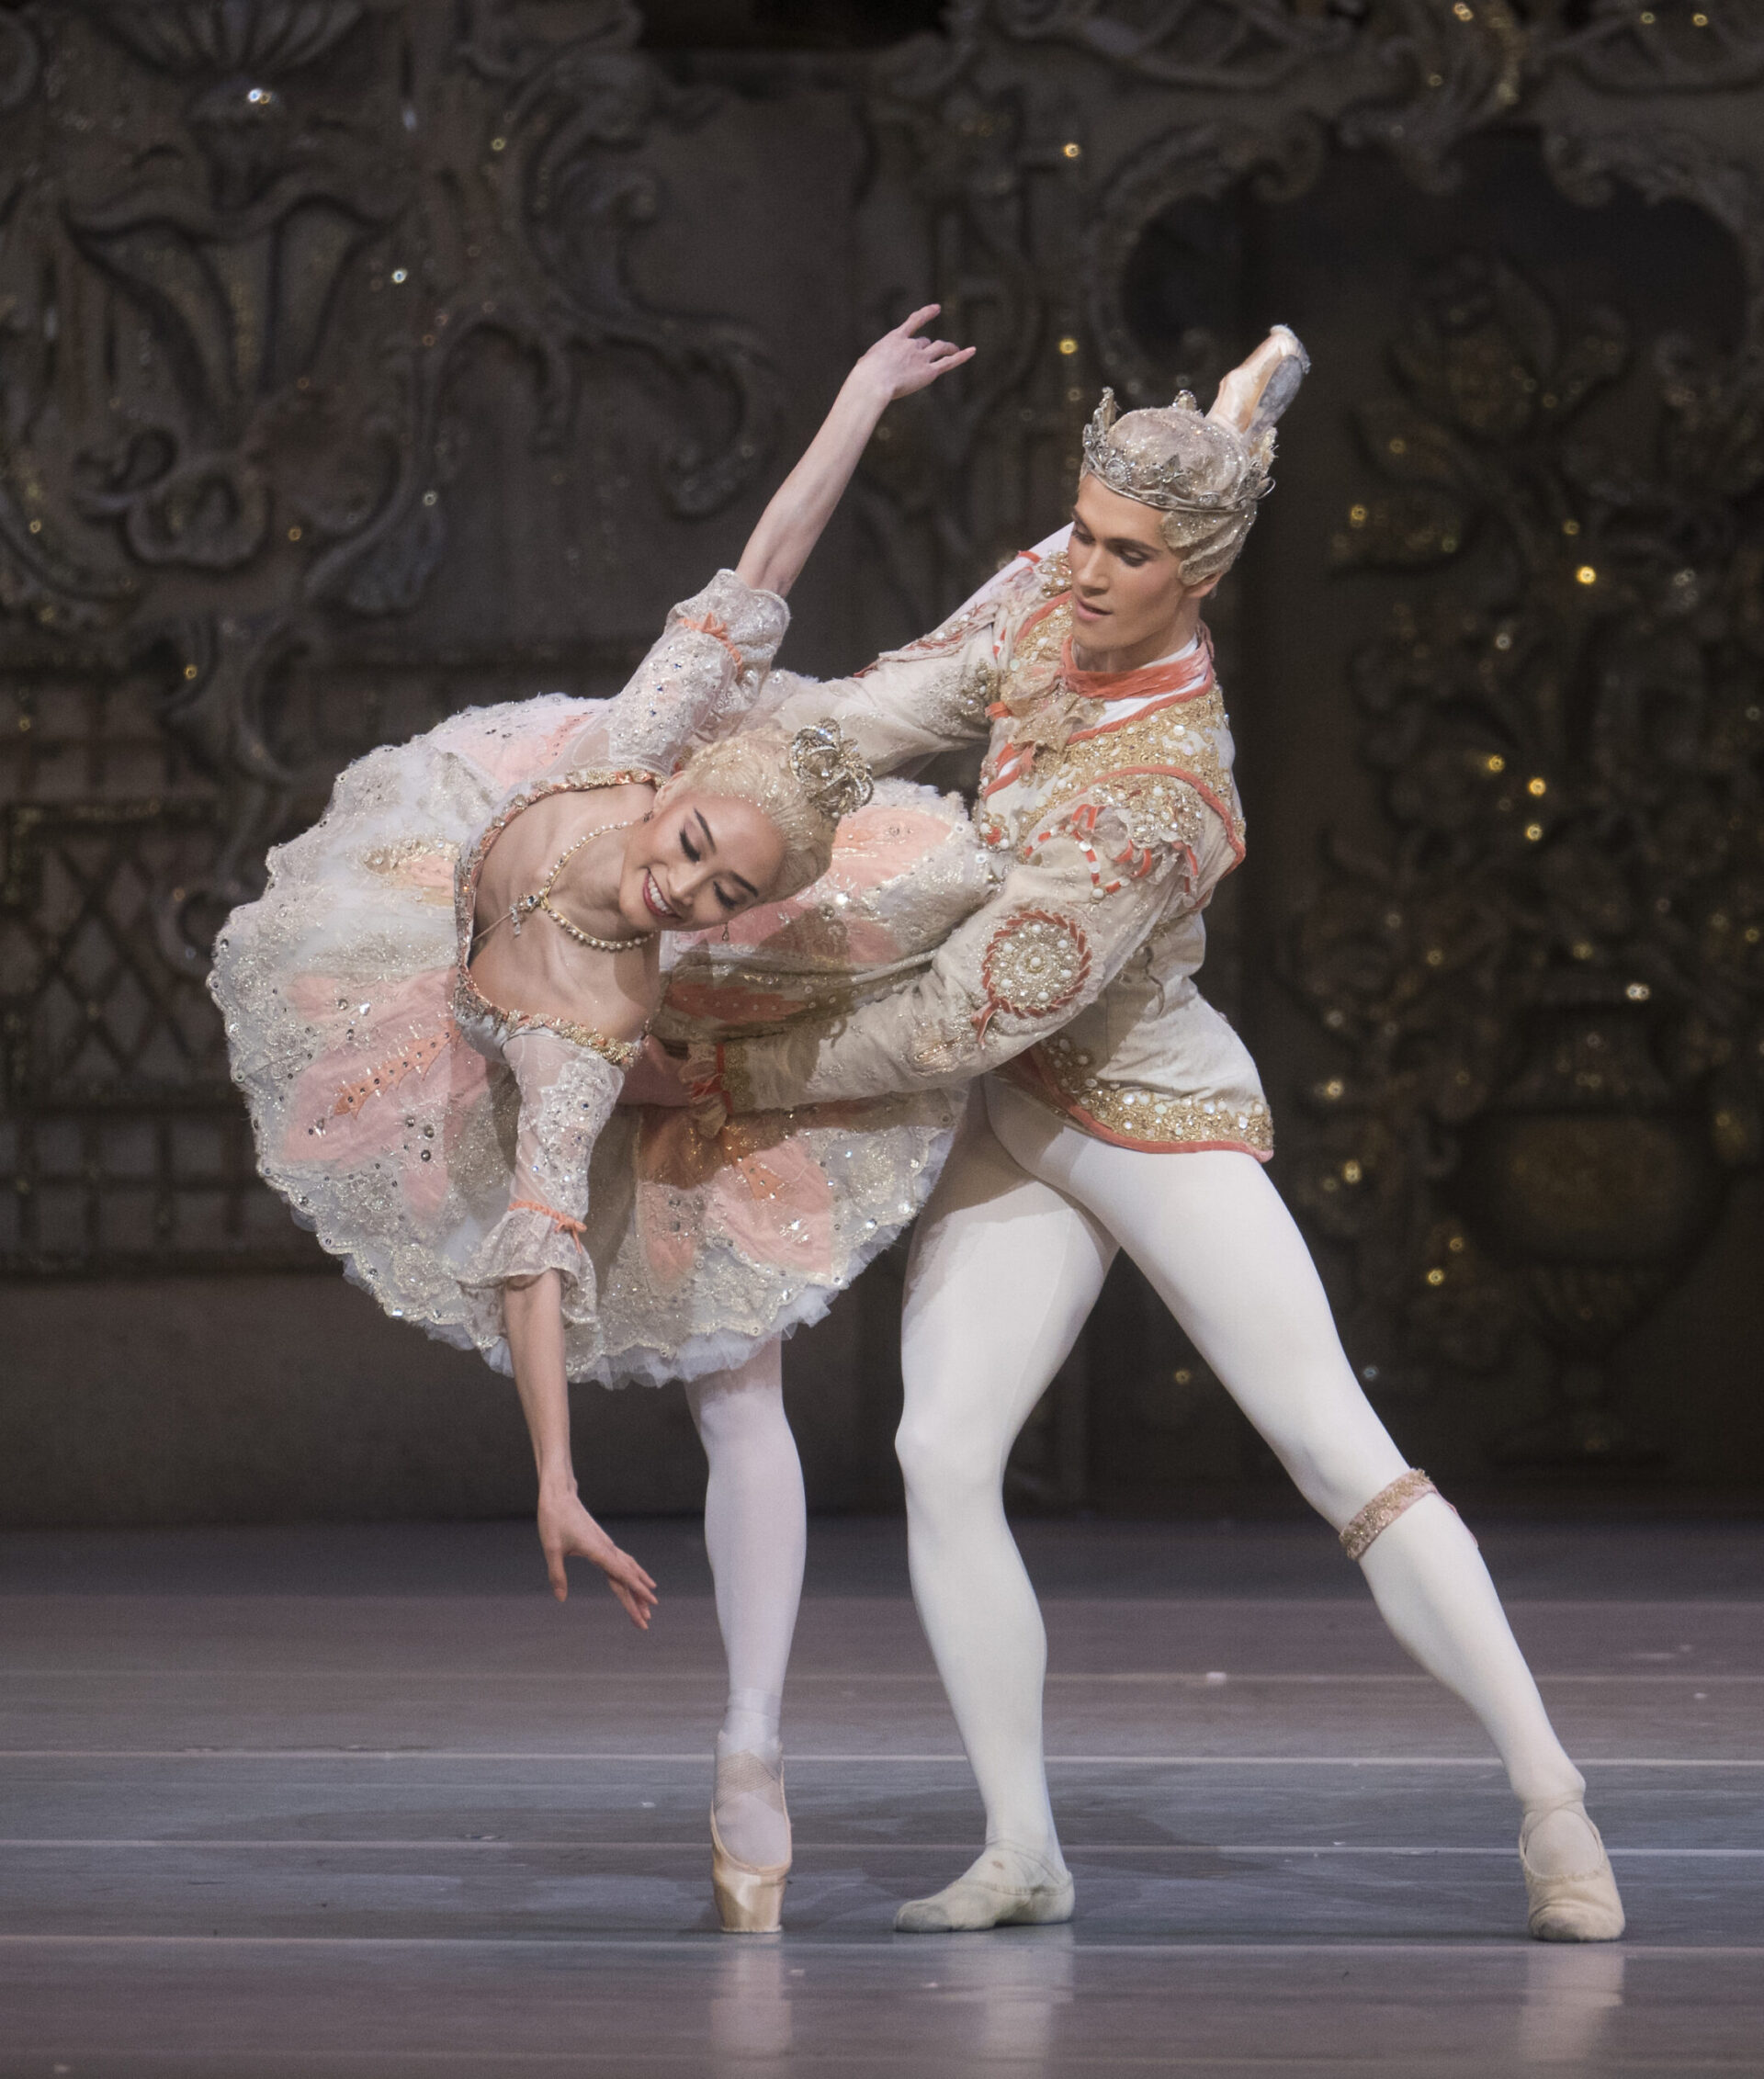 'The Nutcracker performed by the Royal Ballet at the Royal Opera House, London, UK